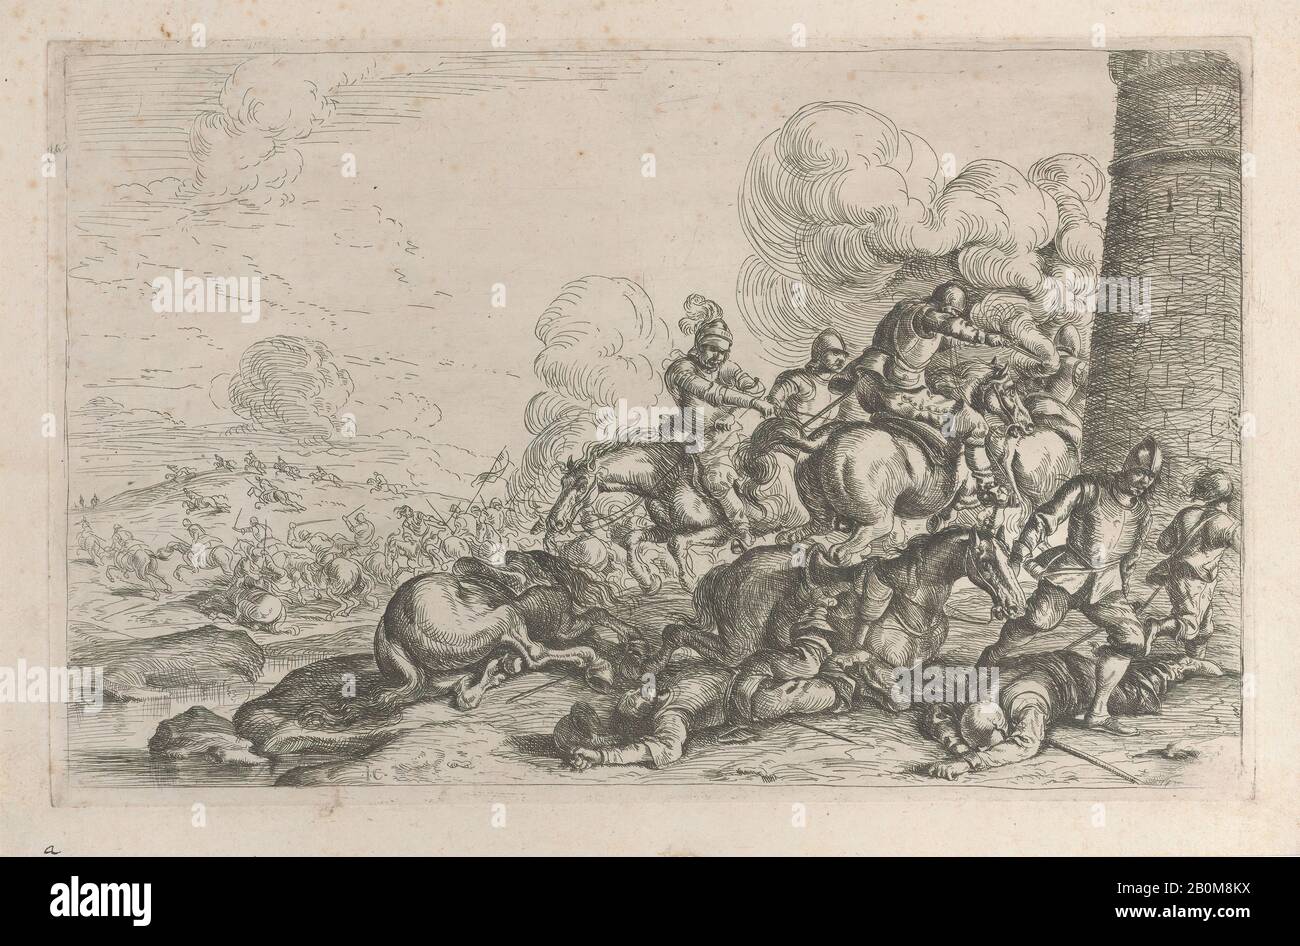 Jacques Courtois, Combat at the foot of a tower, Combats et batailles (Combats and battles), Jacques Courtois (French, Saint-Hippolyte 1621–1676 Rome), 1635–60, Etching, Plate: 8 3/8 × 13 3/16 in. (21.3 × 33.5 cm), Sheet: 9 5/8 × 14 3/8 in. (24.4 × 36.5 cm), Prints Stock Photo